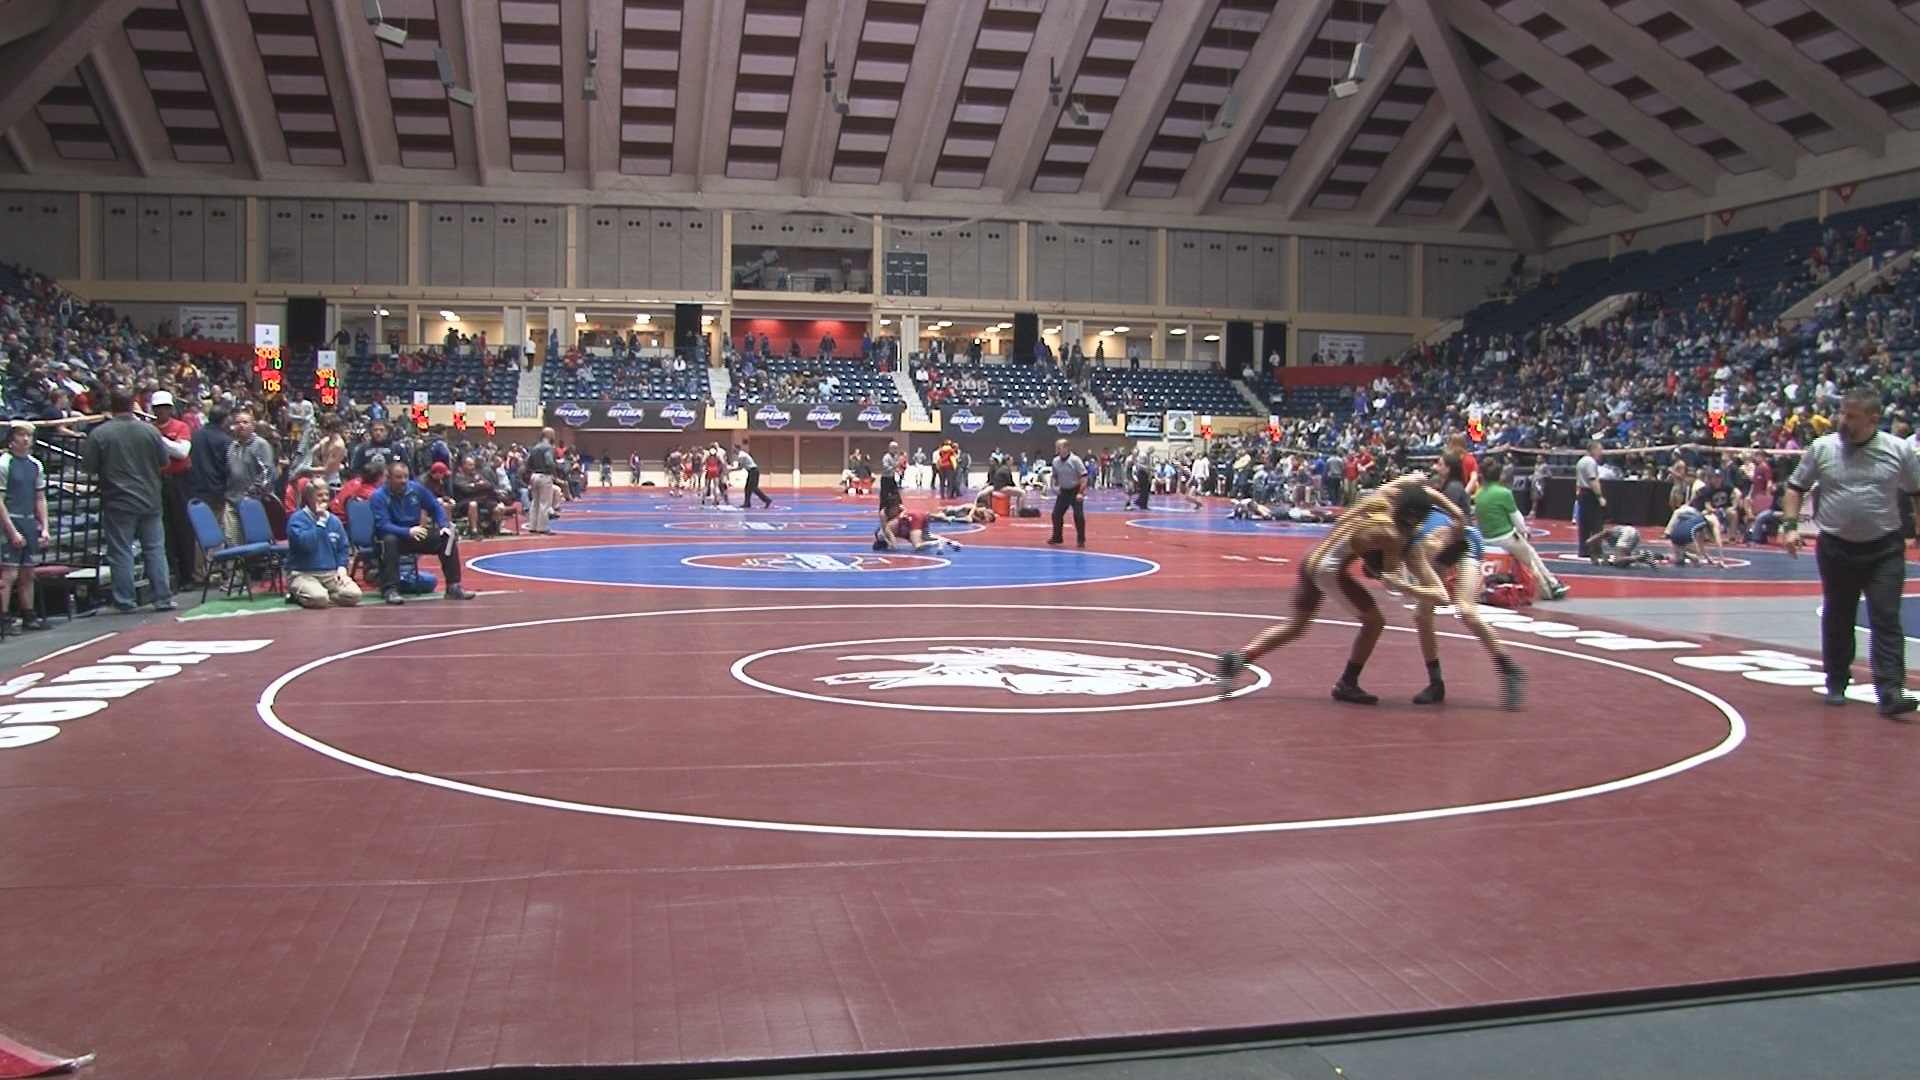 GHSA wrestling tournament brings millions to Macon